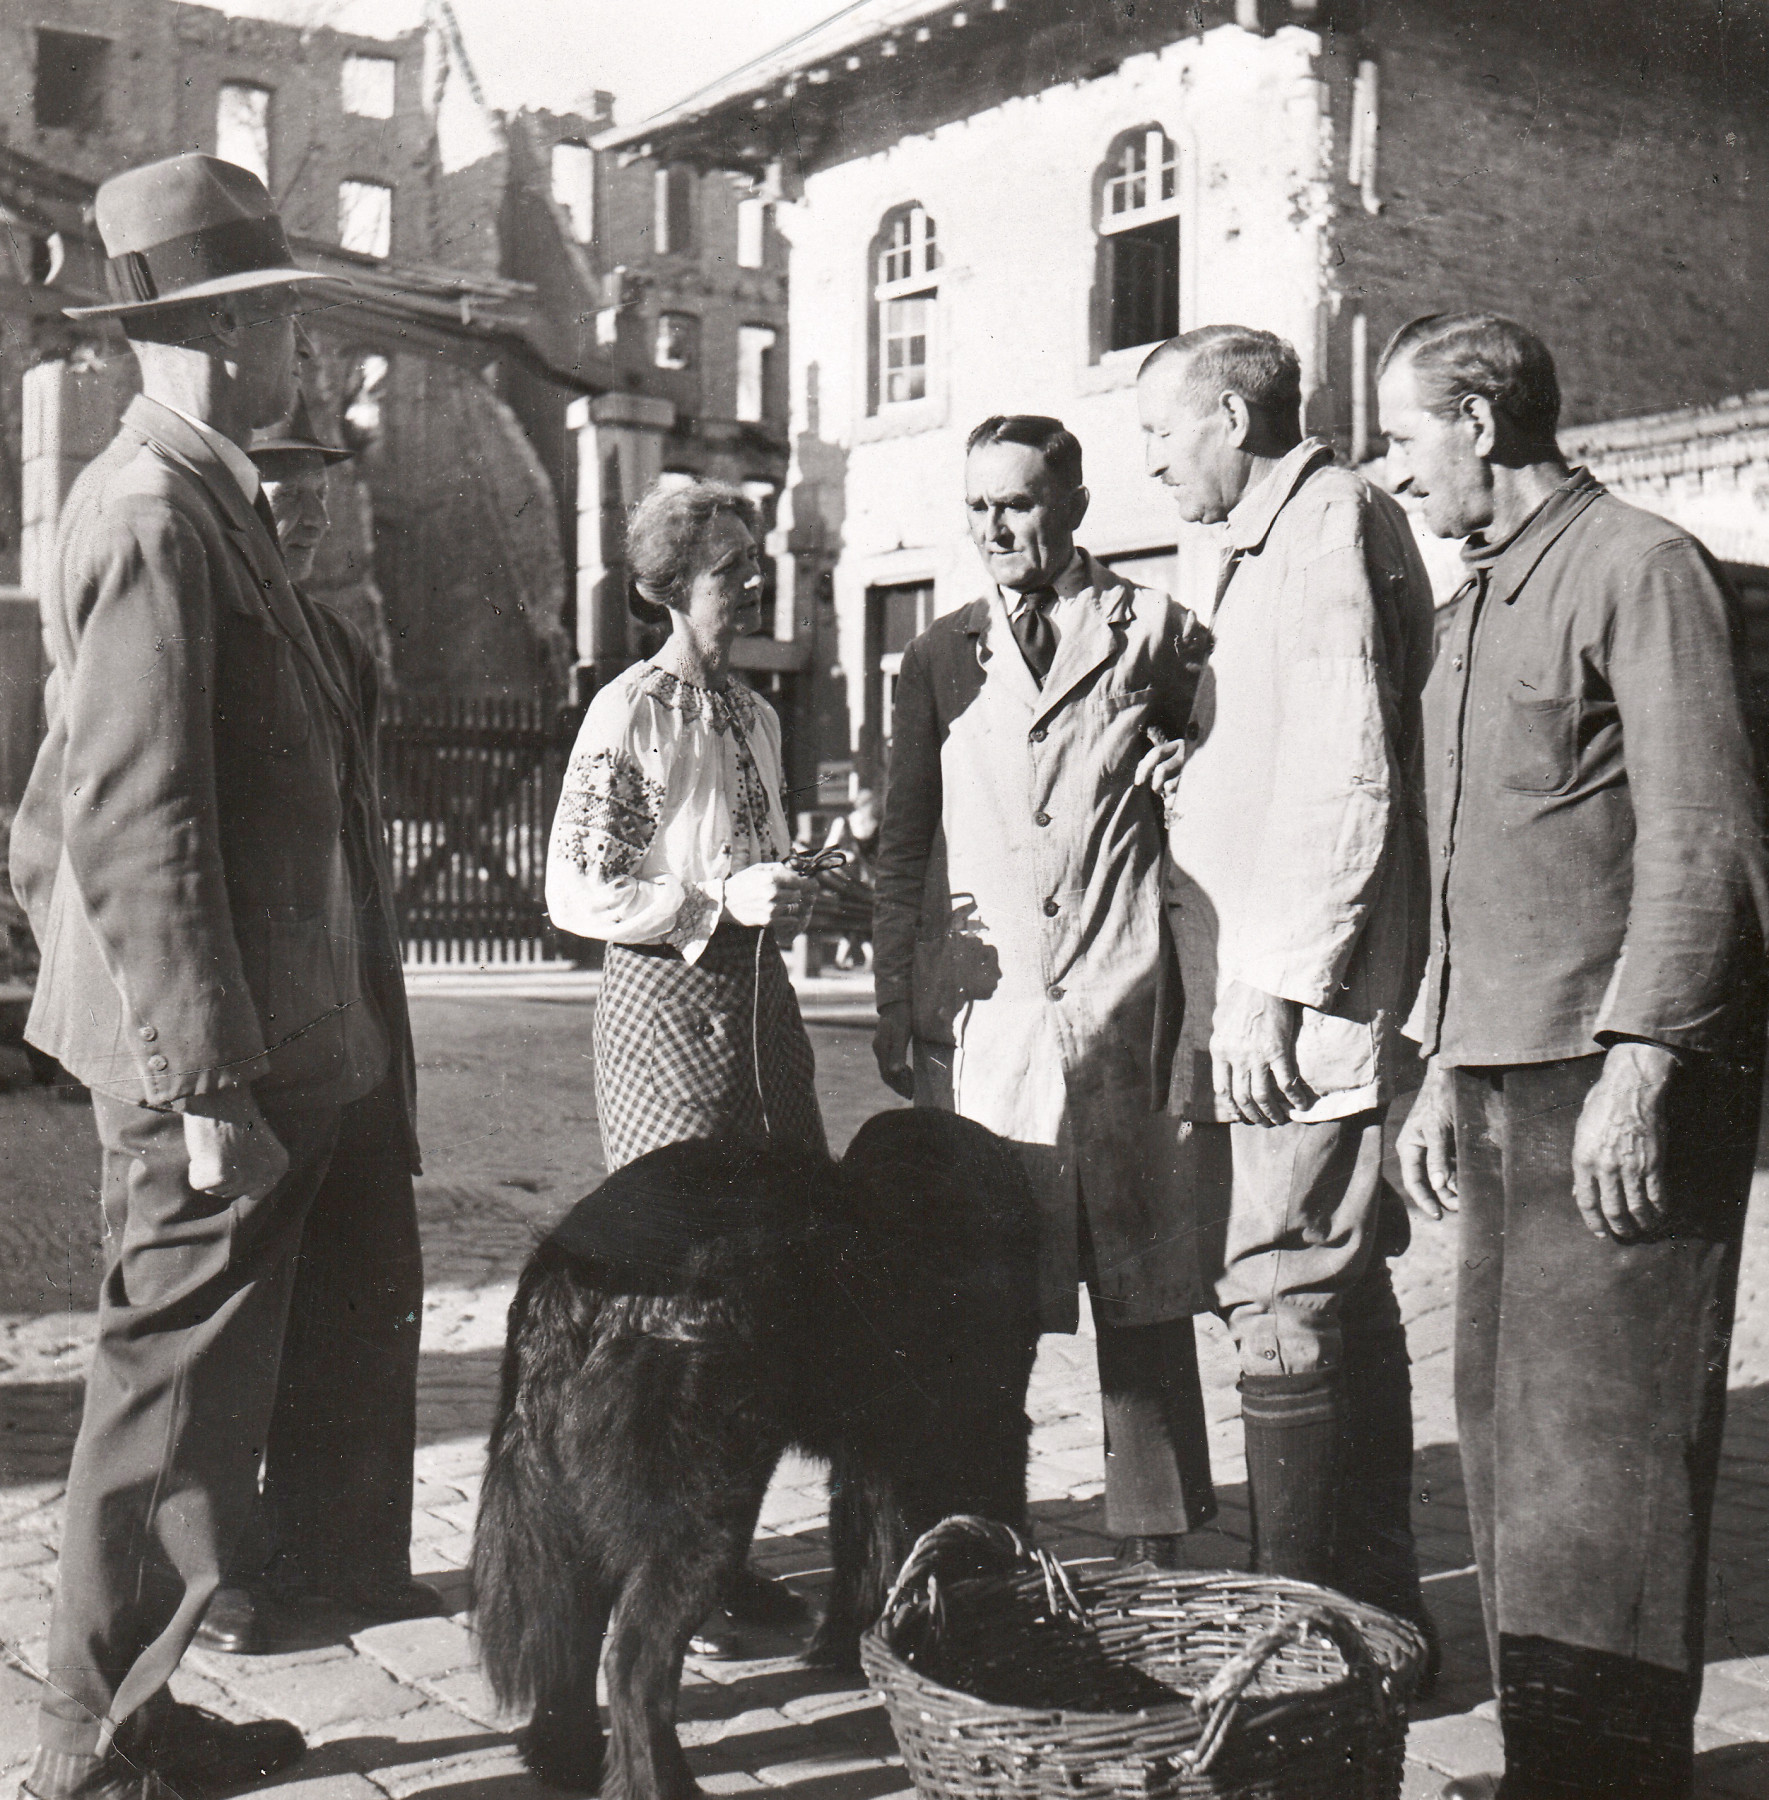 Black and white photograph: Four men, a woman, and a dog standing next to a woven basket, in front of partially destroyed buildings.